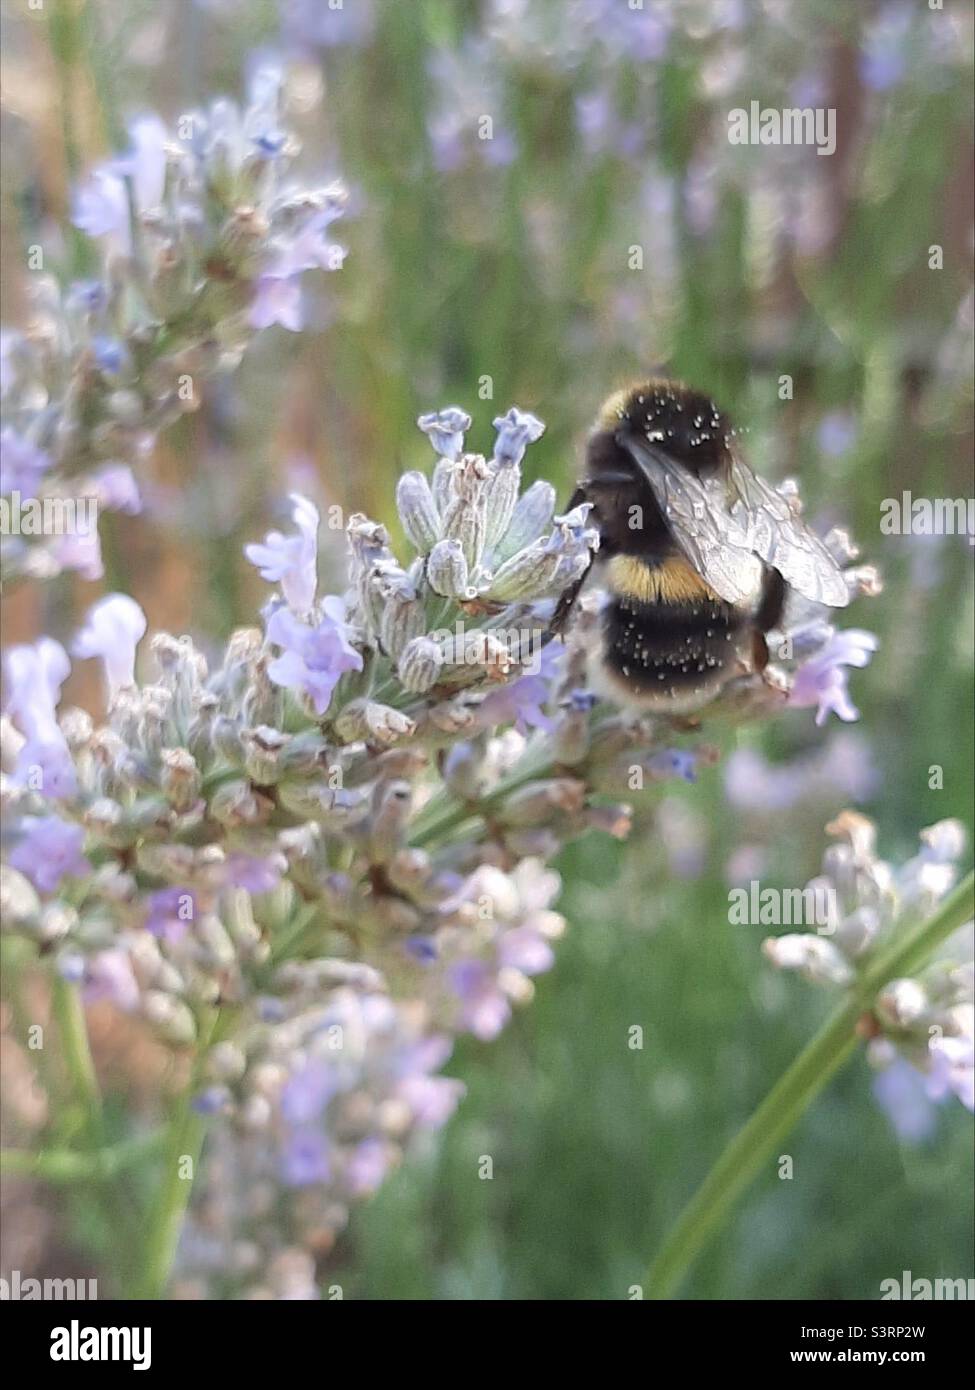 Bumble bee on lavender Stock Photo